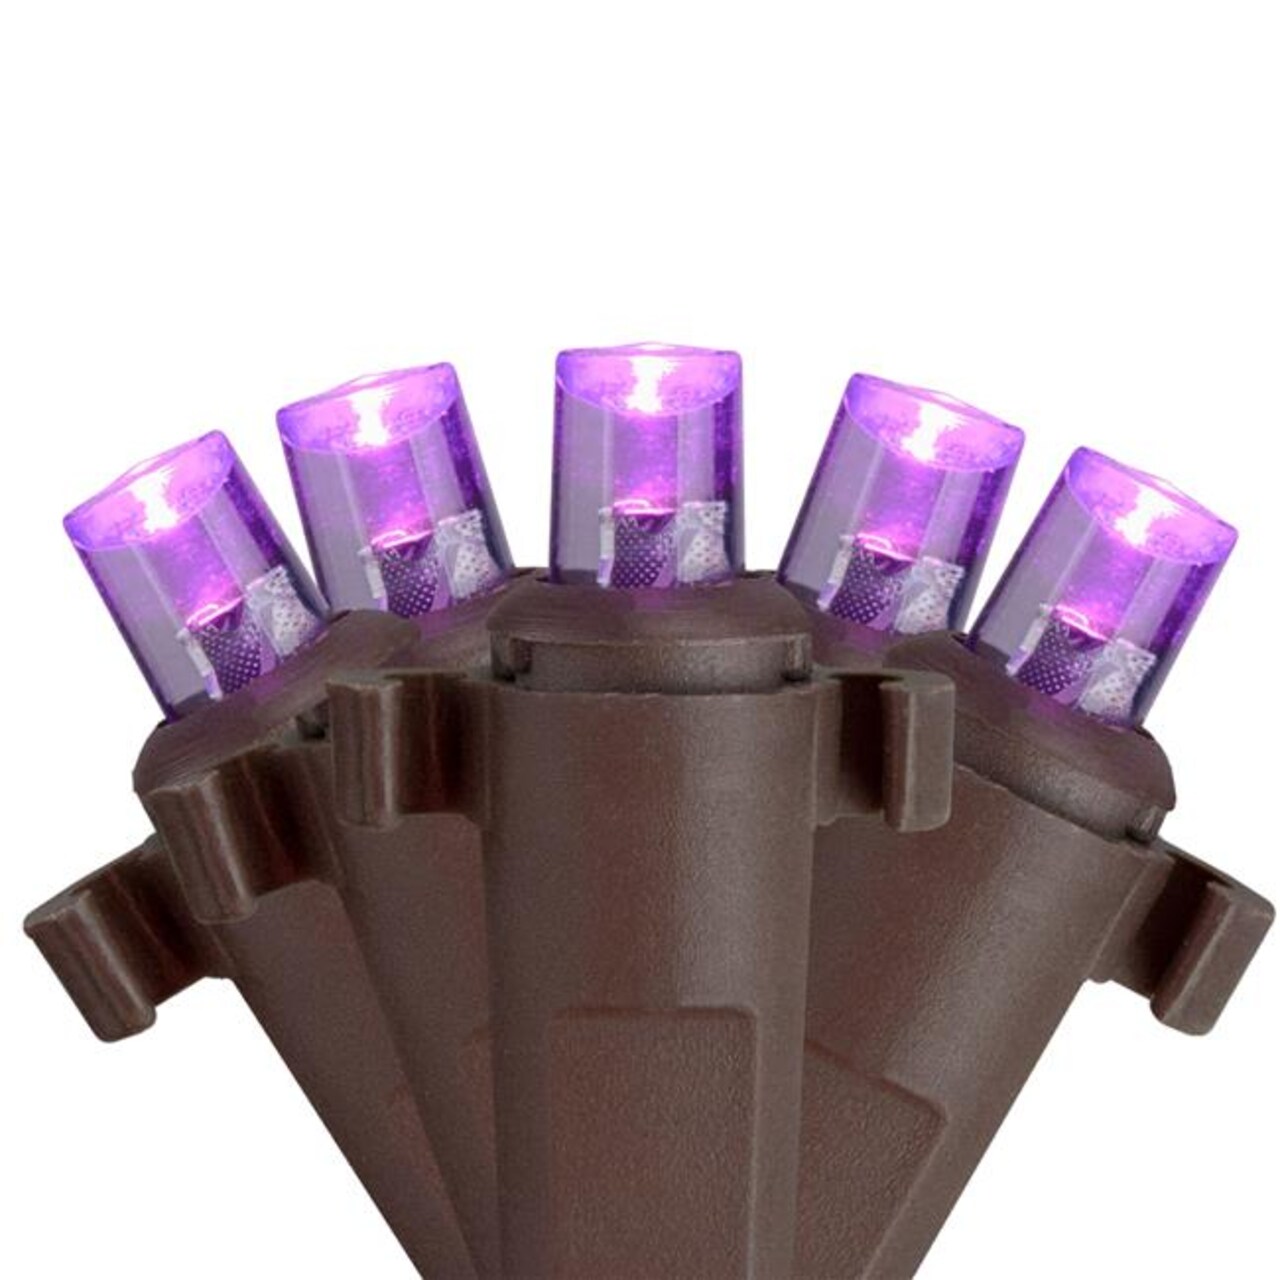 Brite Star 32551286 2 x 8 ft. Brown Wire Purple LED Net Style Tree Trunk Wrap Christmas Lights